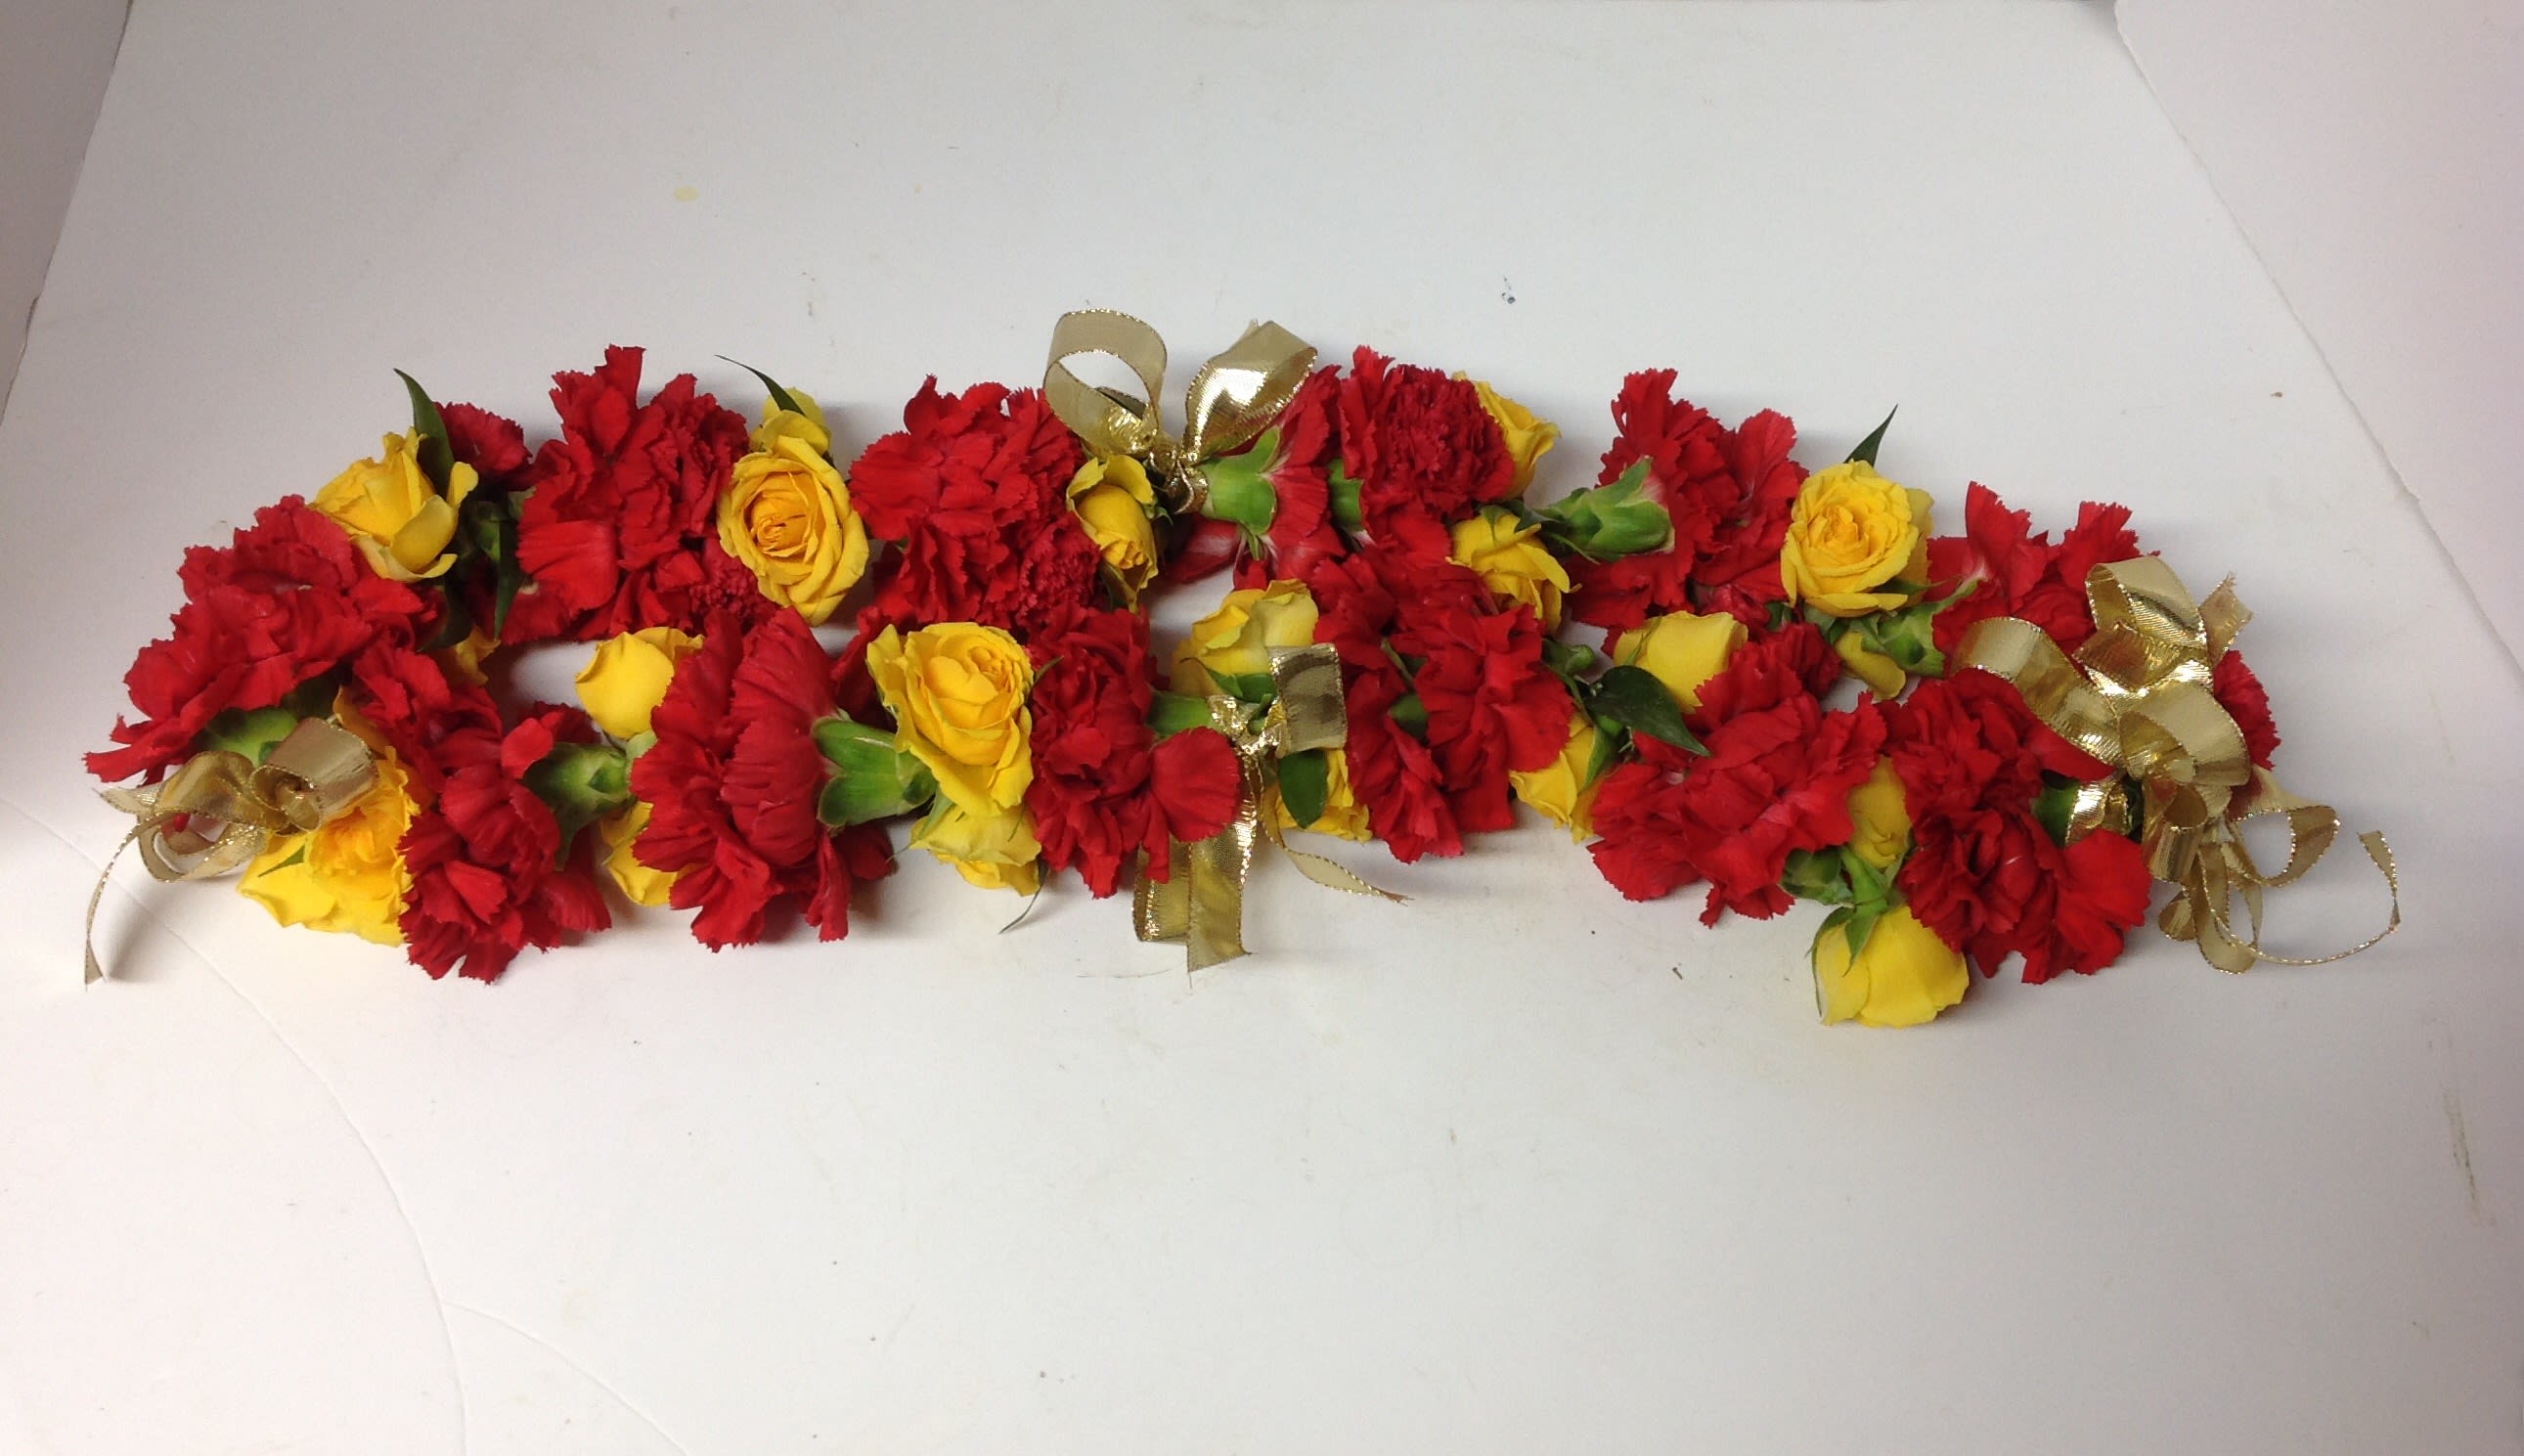 Leis #2 - Our beautiful leis are great for graduations, birthdays, or any celebration!